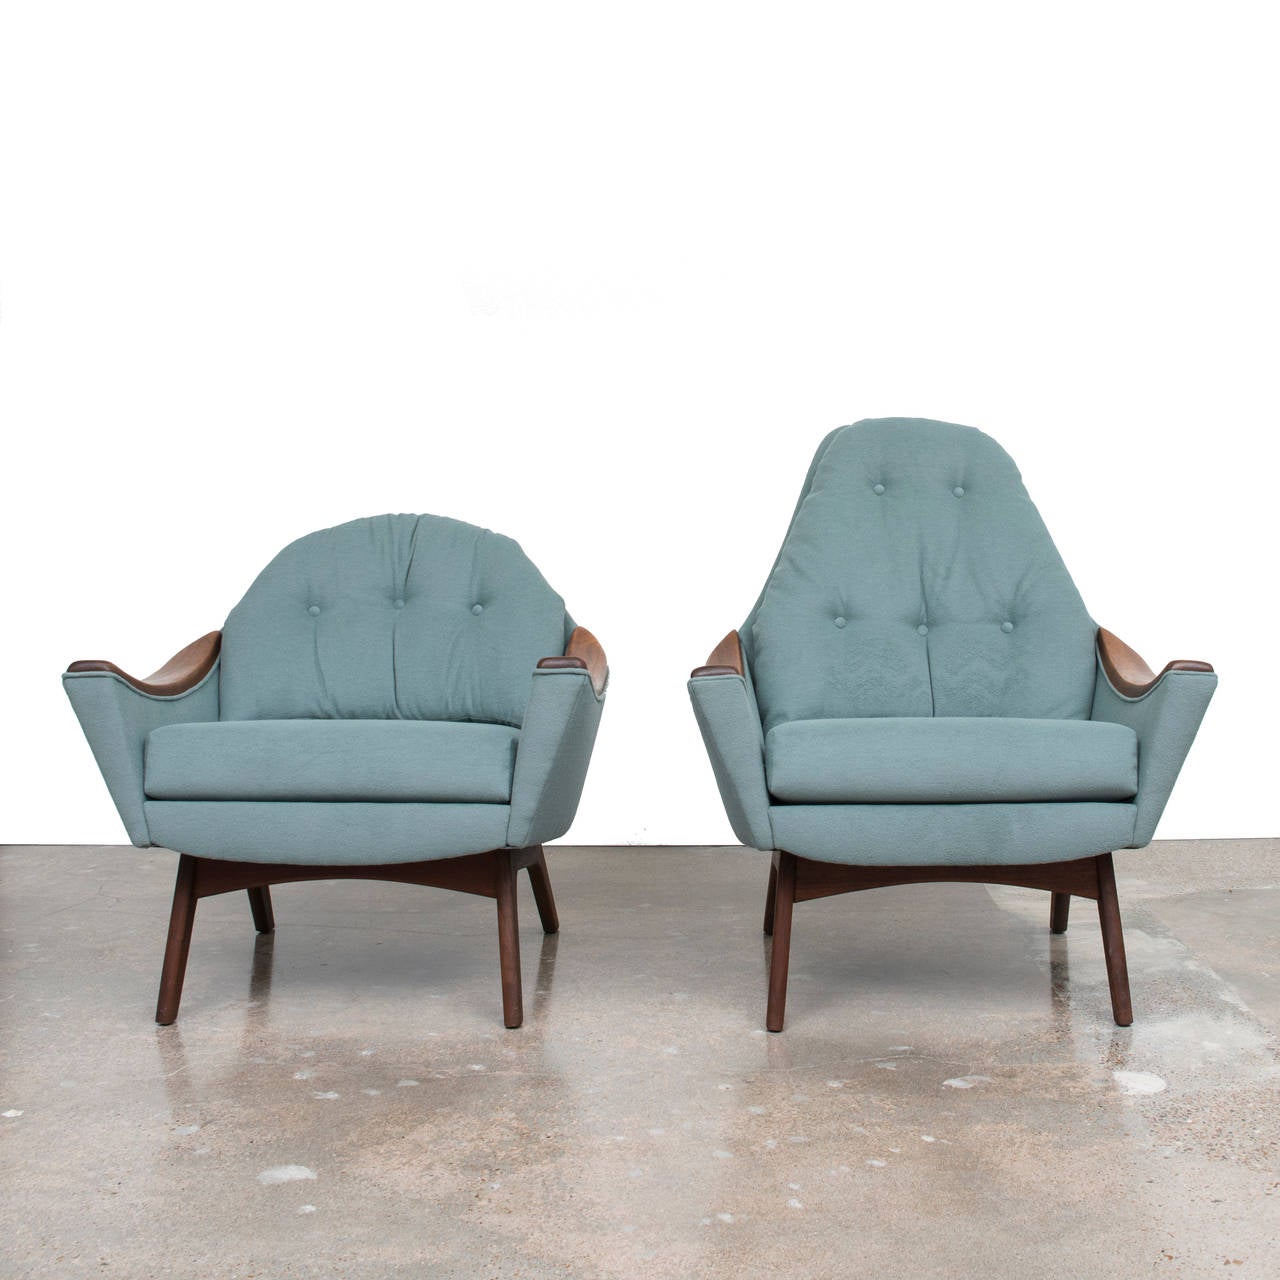 American Adrian Pearsall Sleigh-Form Chairs (his & hers)